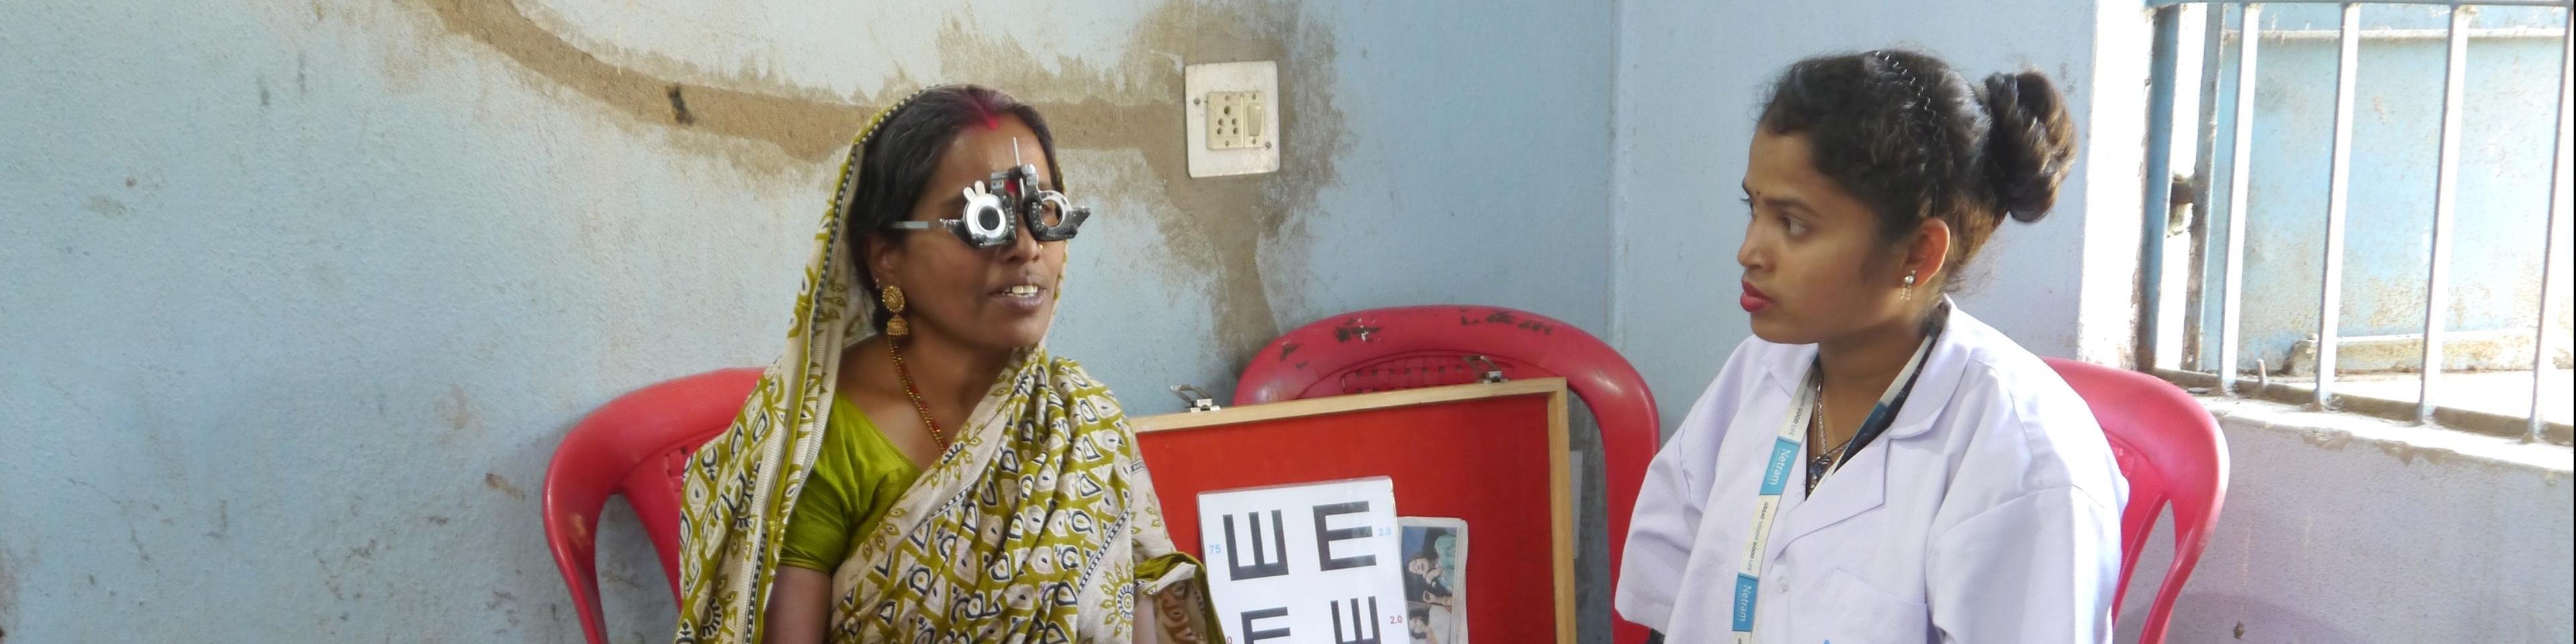 Eye test with optical measuring glasses 